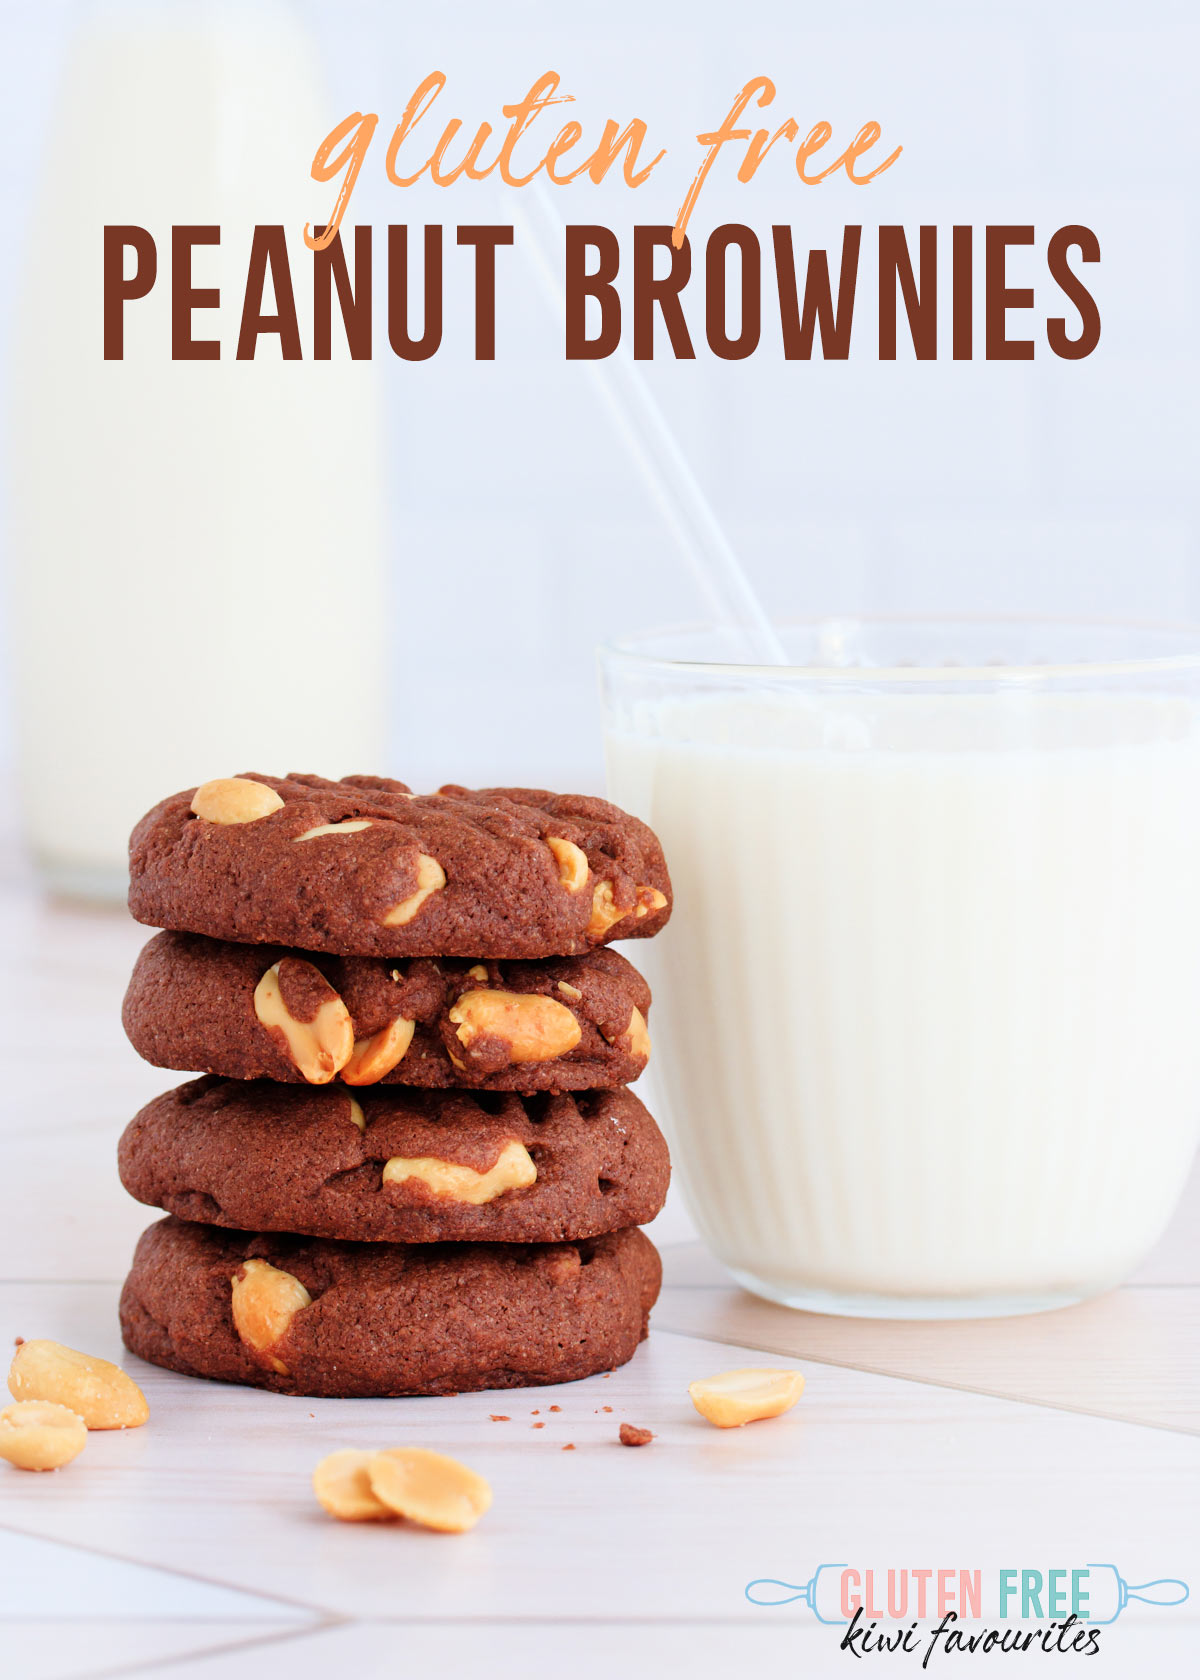 Four stacked biscuits next to a glass of milk with a clear straw, text overlay reads "gluten free peanut brownies".